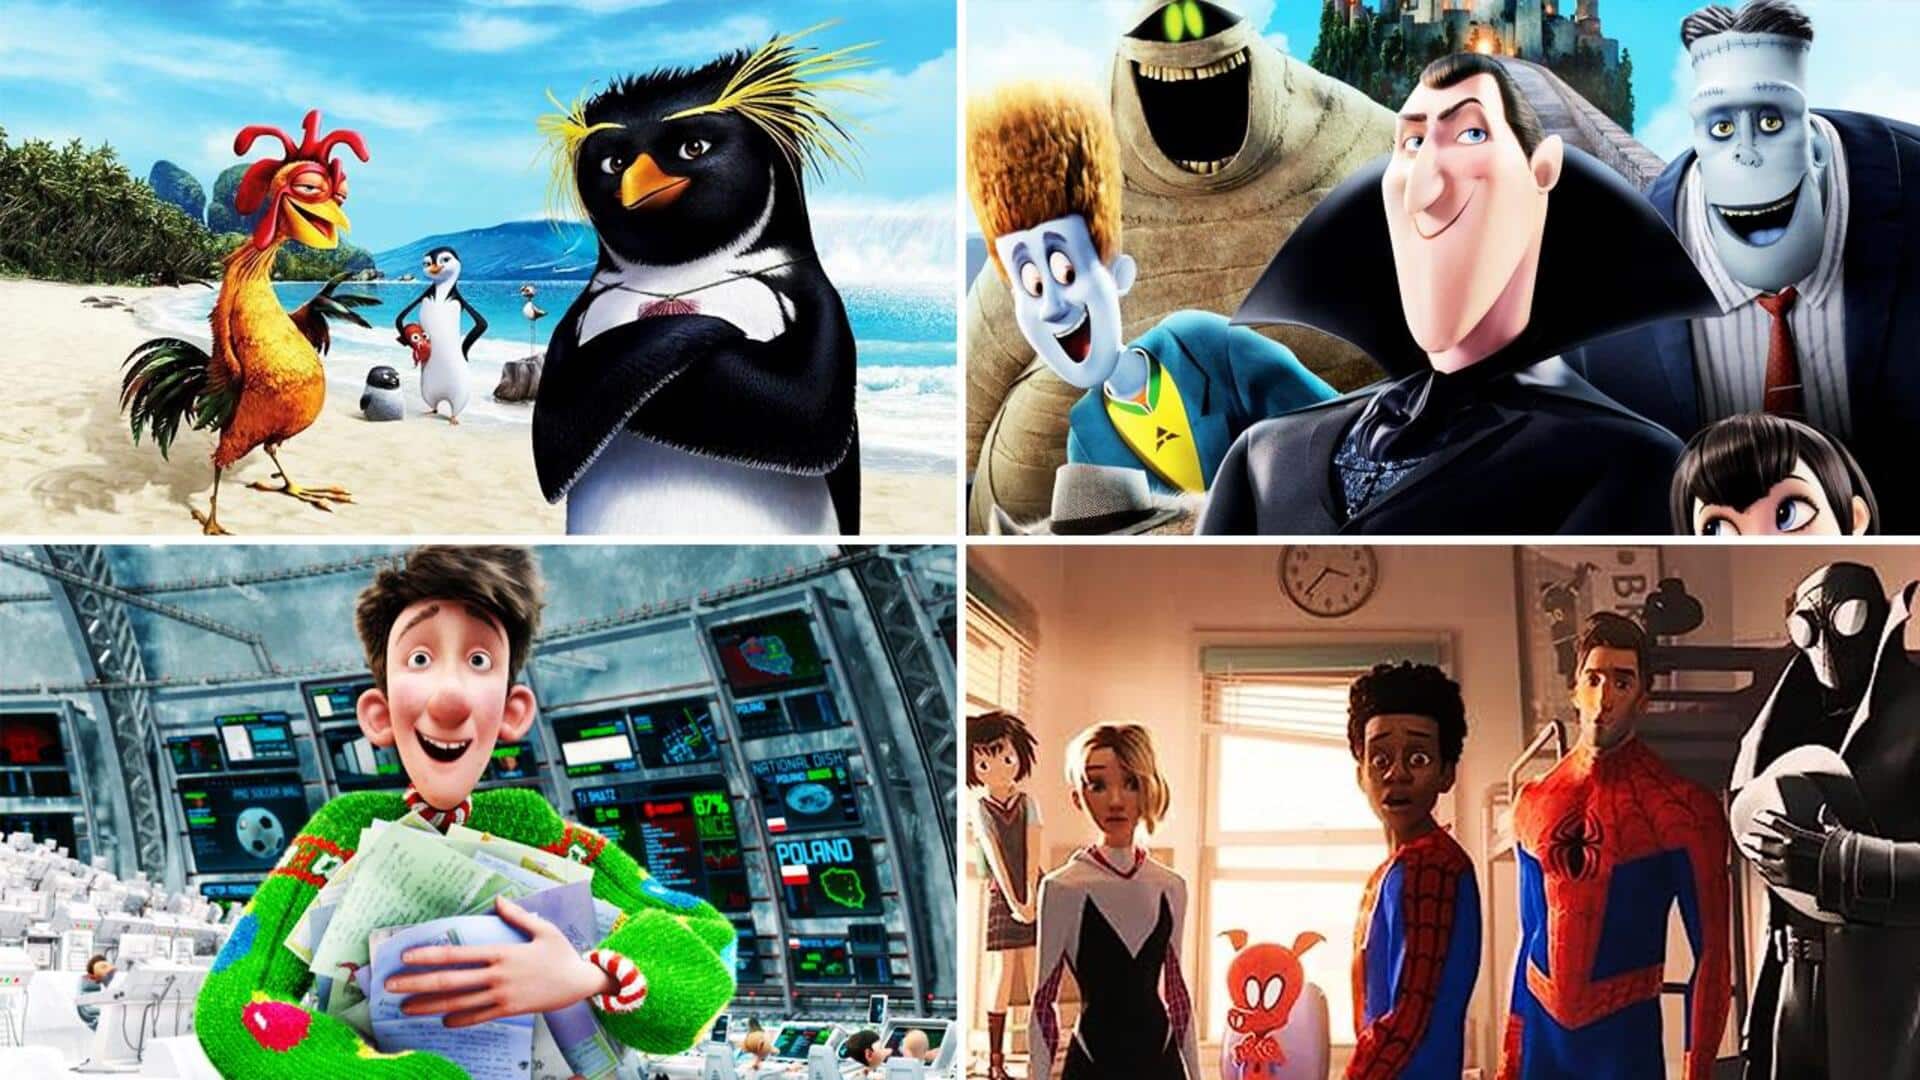 'Hotel Transylvania' to 'Spider-Man': Best Sony Pictures animated movies